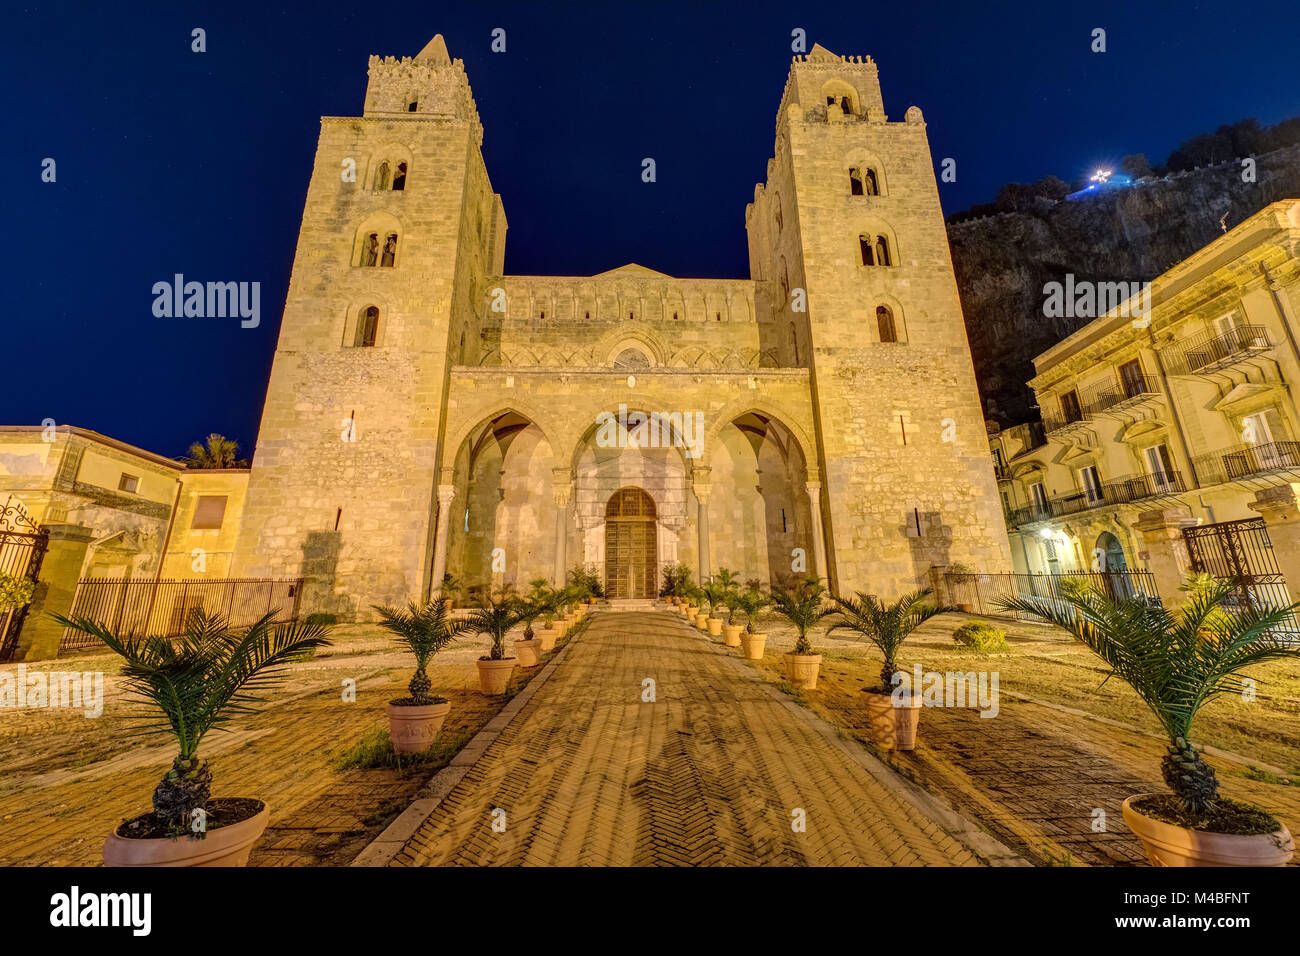 The norman cathedral of Cefalu in Sicily at night Stock Photo